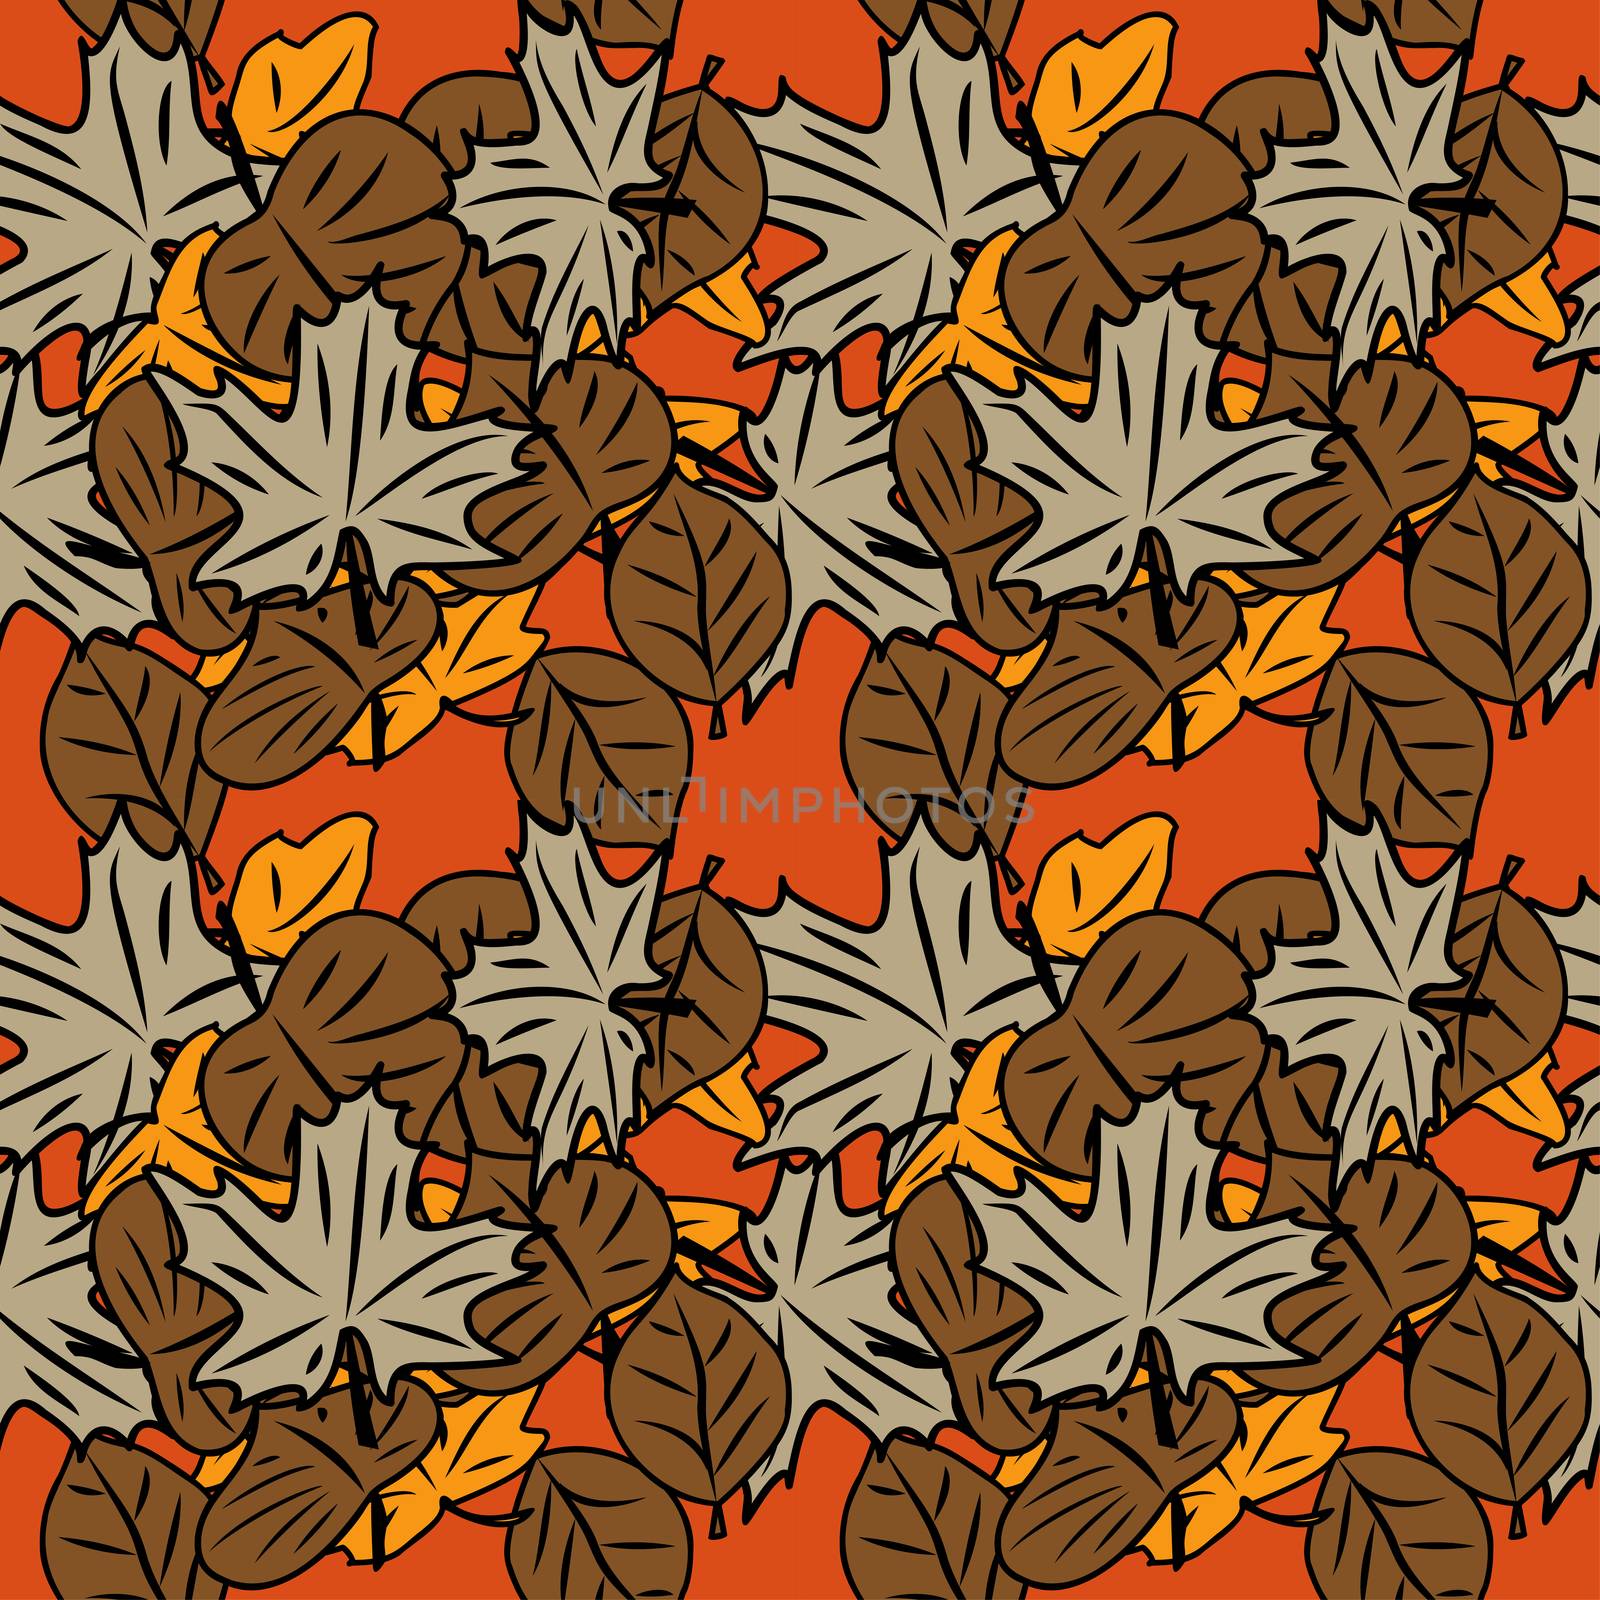 Magic seamless pattern with abstract flowers and feathers.